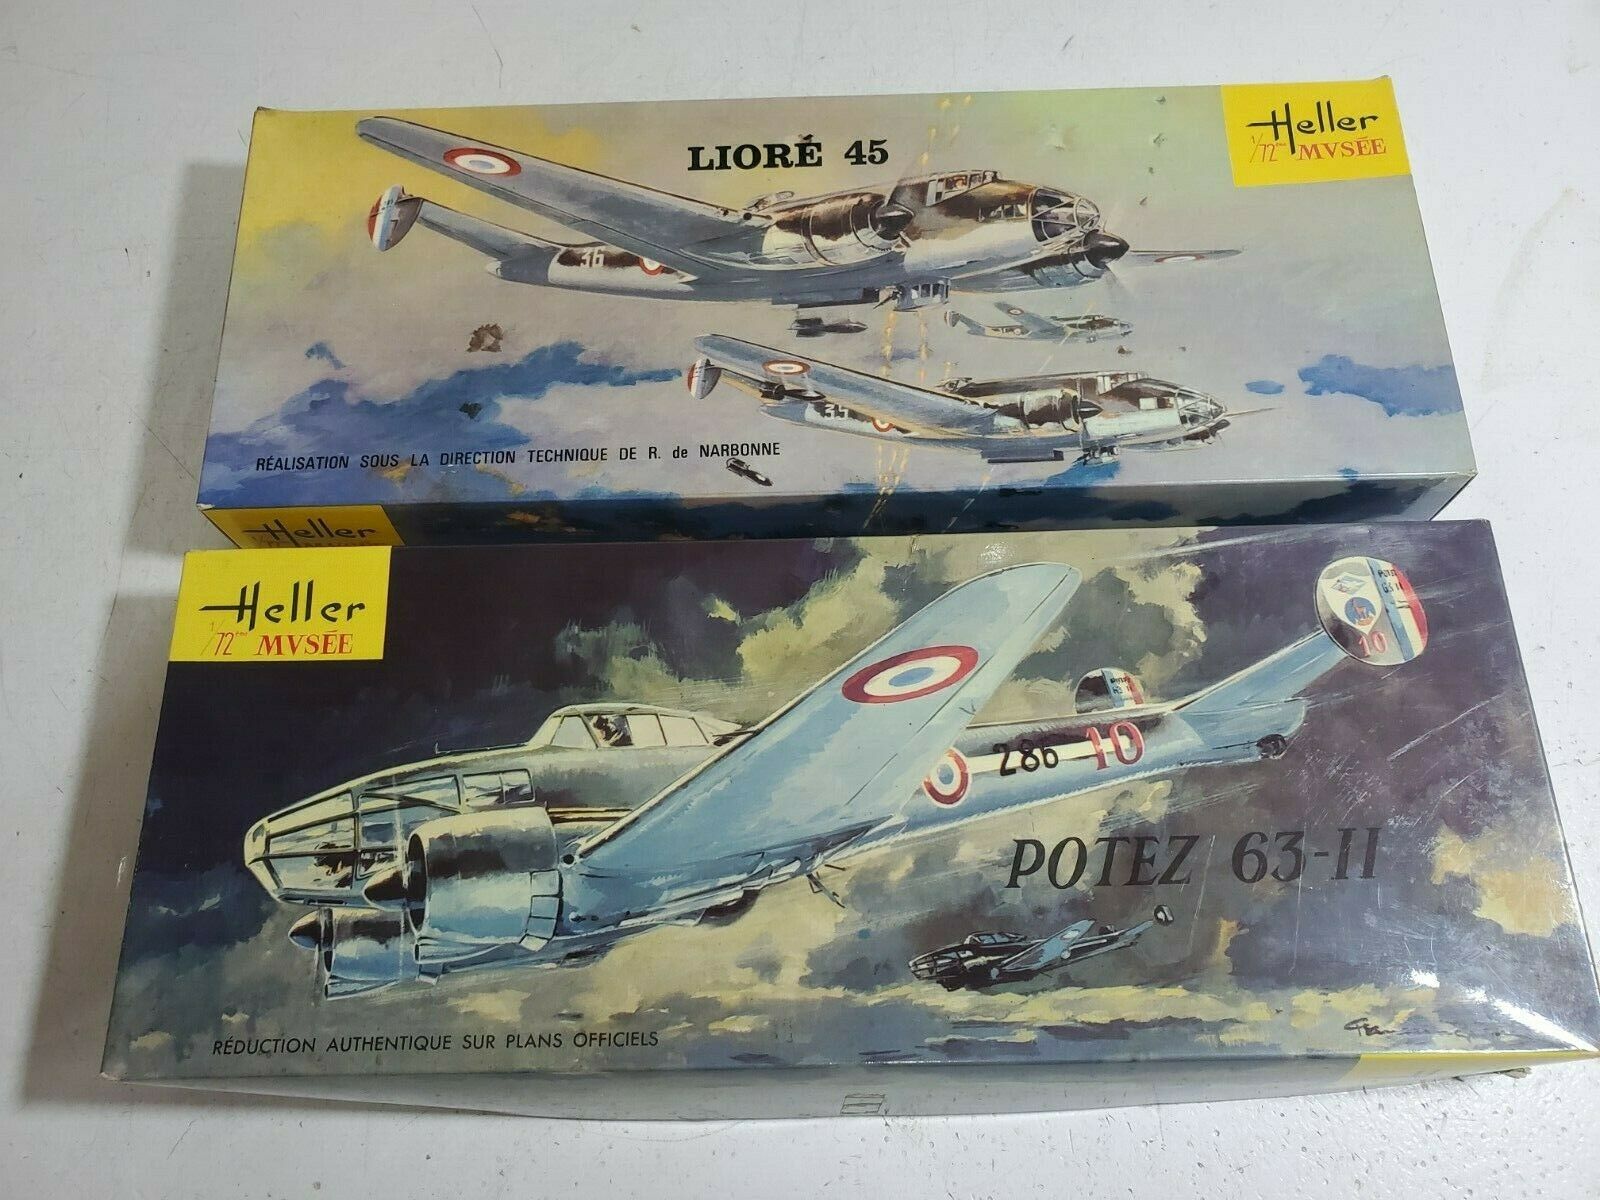 Lot Of 2 1/72 Heller Ww Ii French Potez 63-11 / 630 Liore 45 Model Airplane Kits